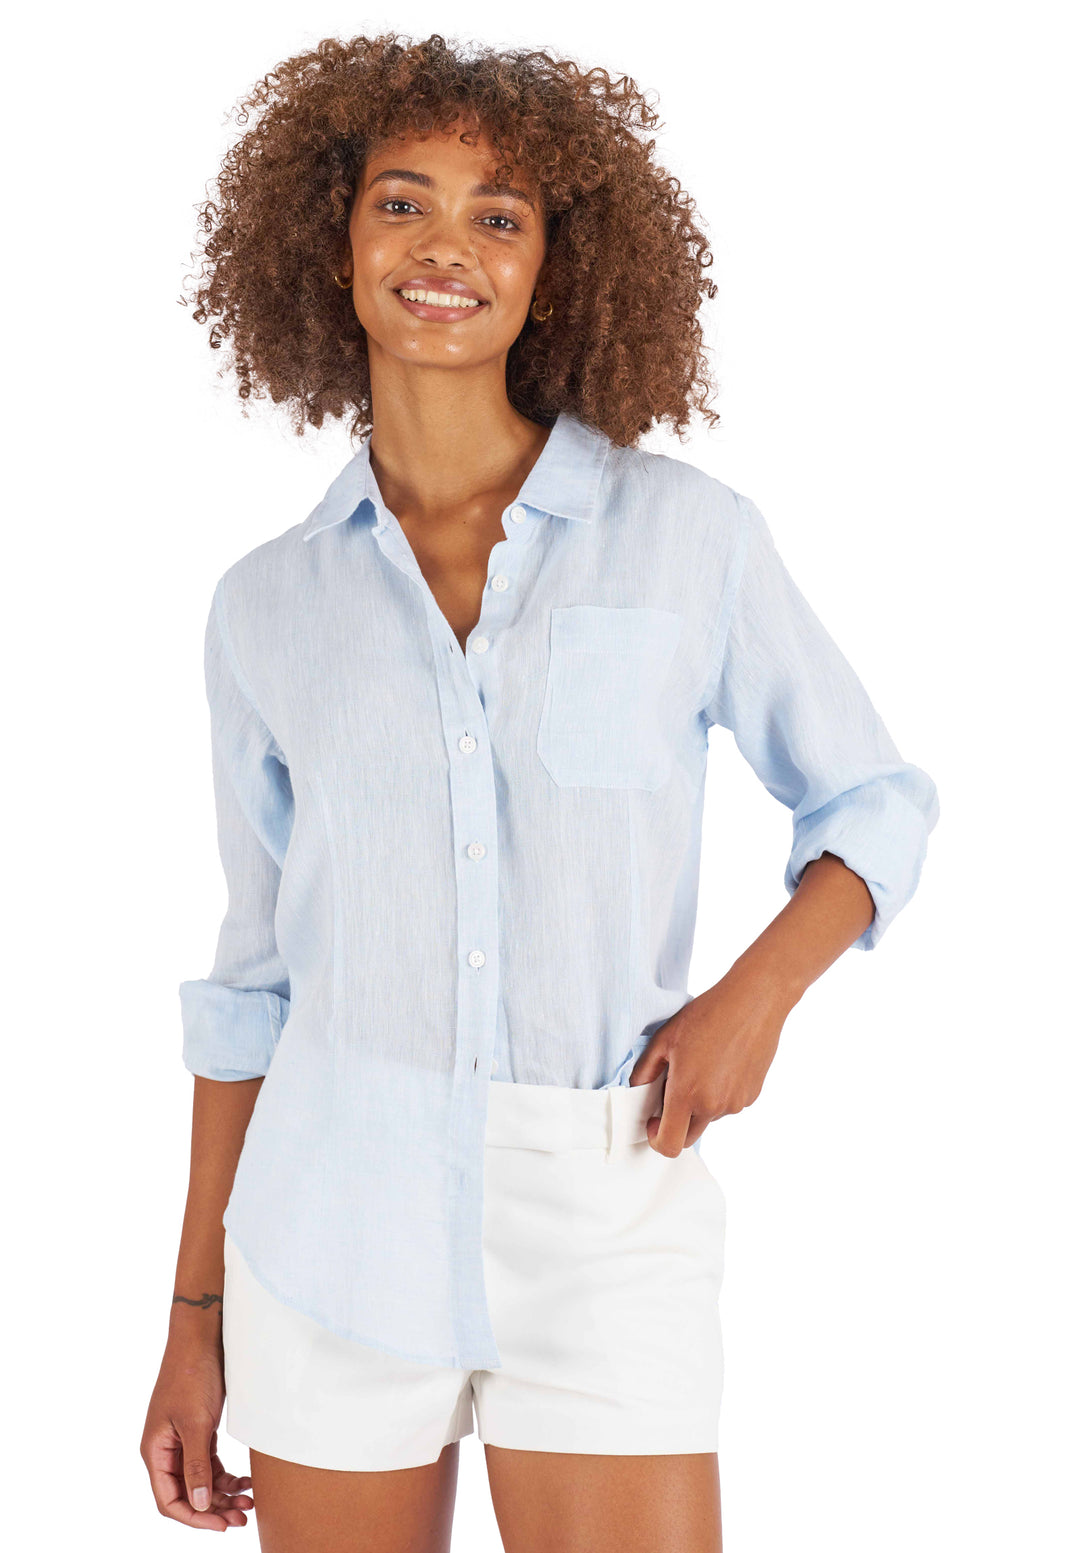 Crinkle Cotton Clothing For Women - No Need To Iron! - Blue Bungalow NZ